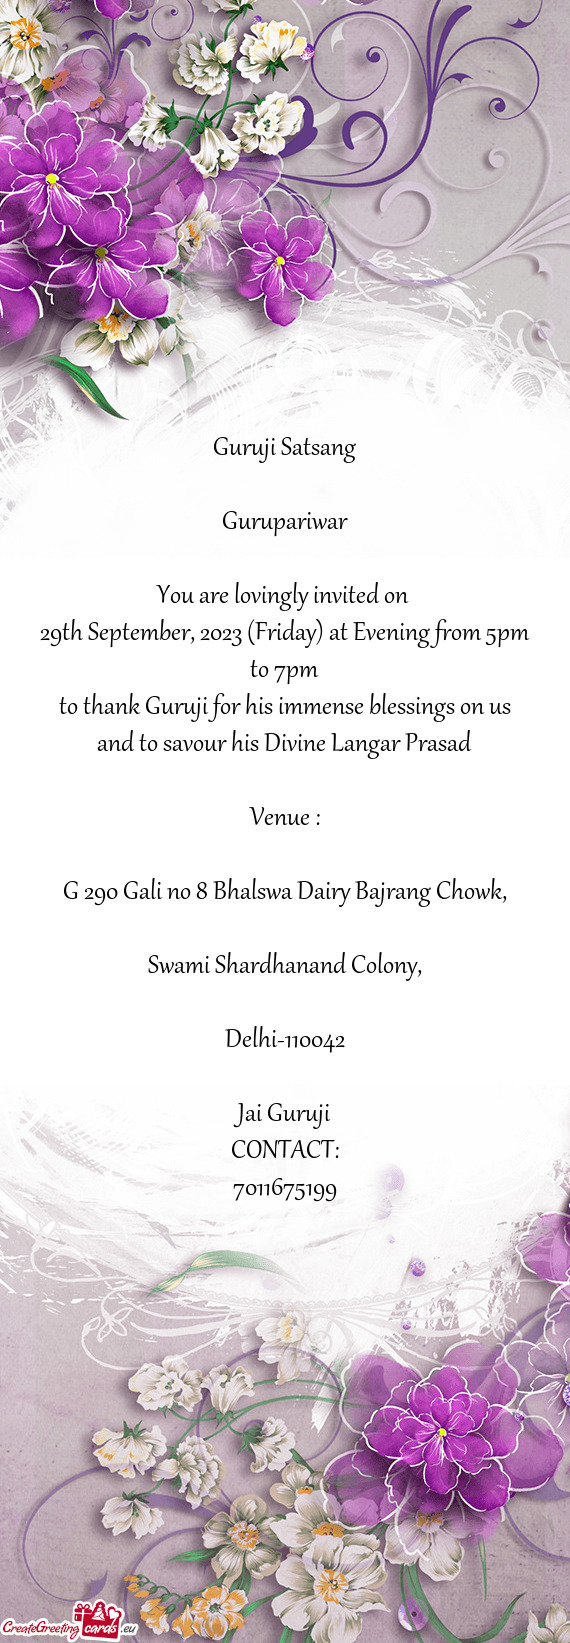 29th September, 2023 (Friday) at Evening from 5pm to 7pm